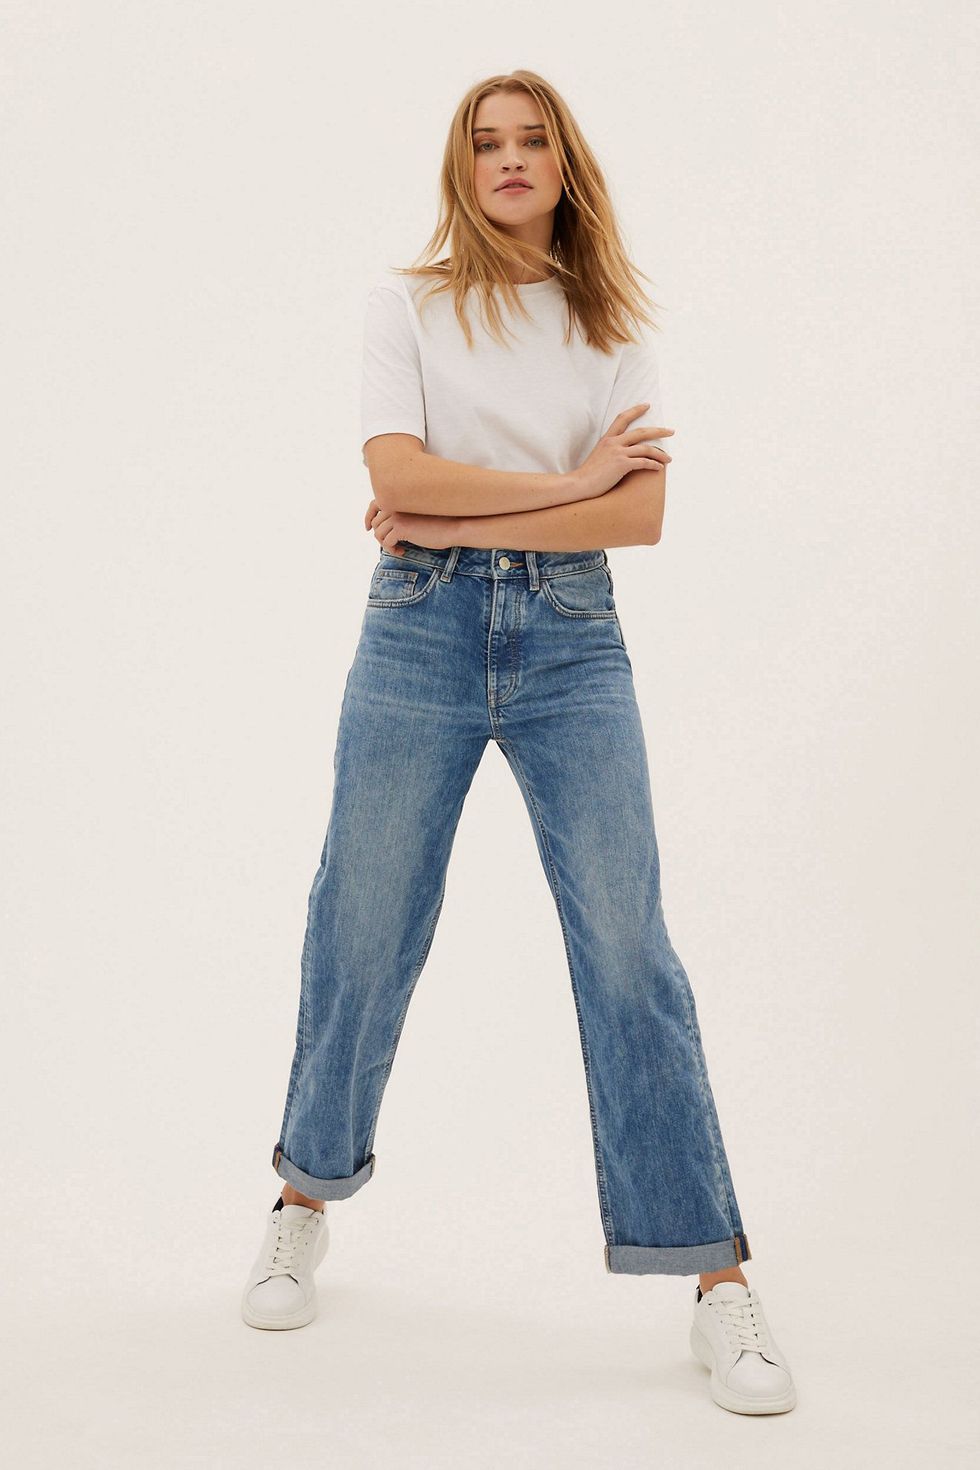 Marks & Spencer launches new sustainable jeans capsule collection